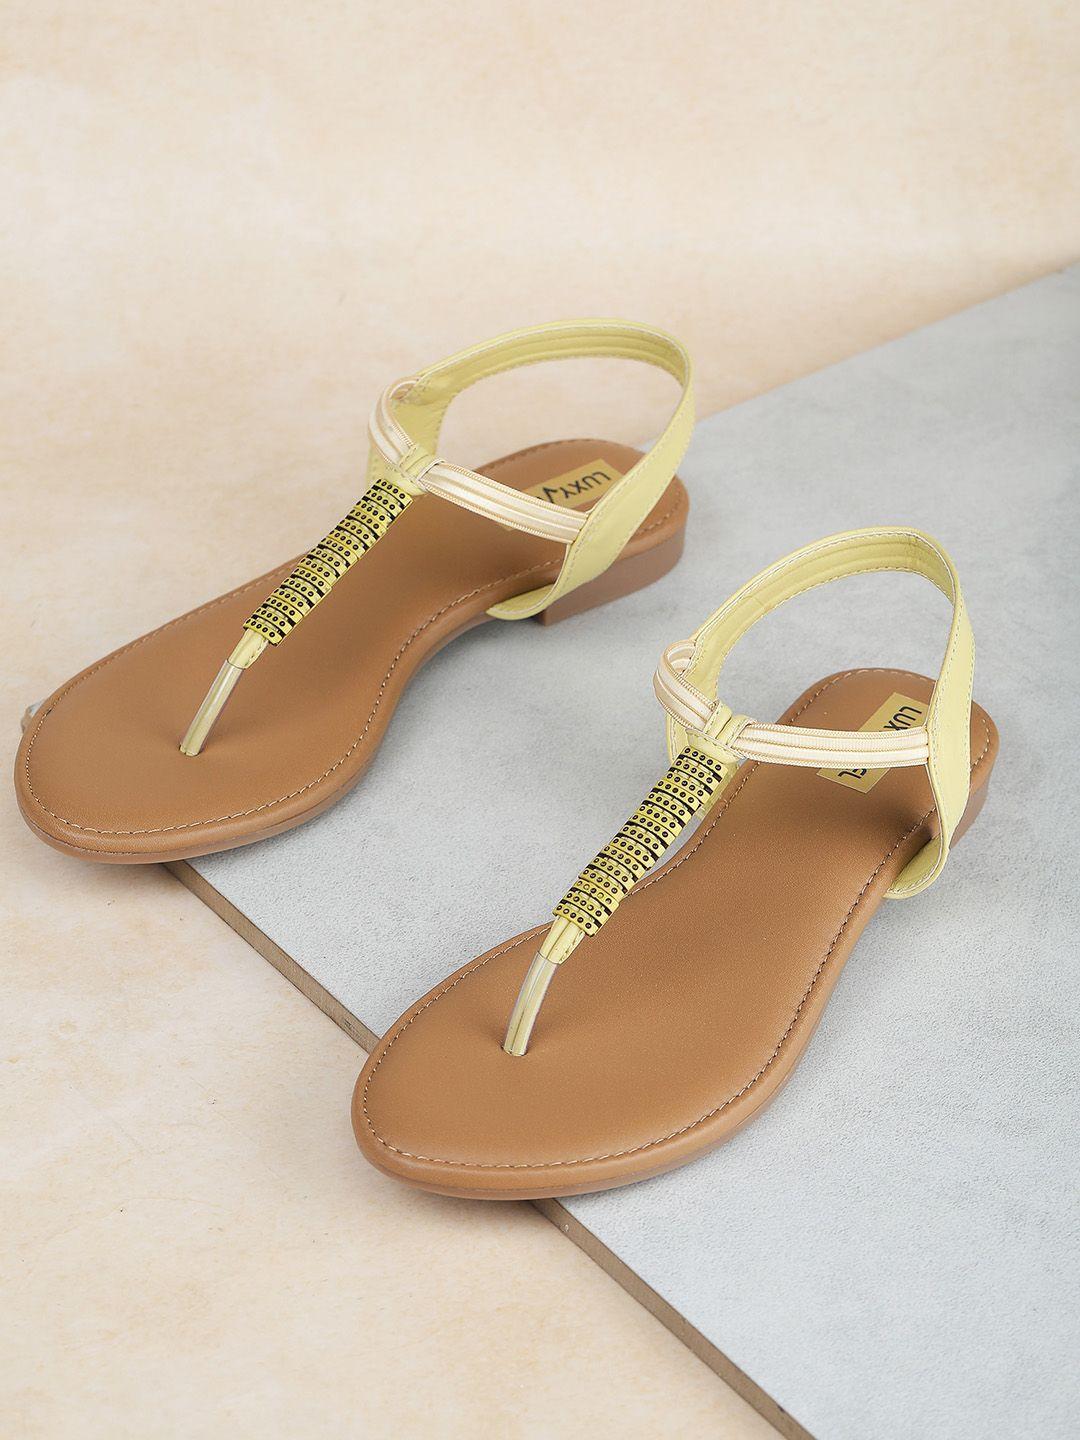 luxyfeel embellished t-strap flats with backstrap